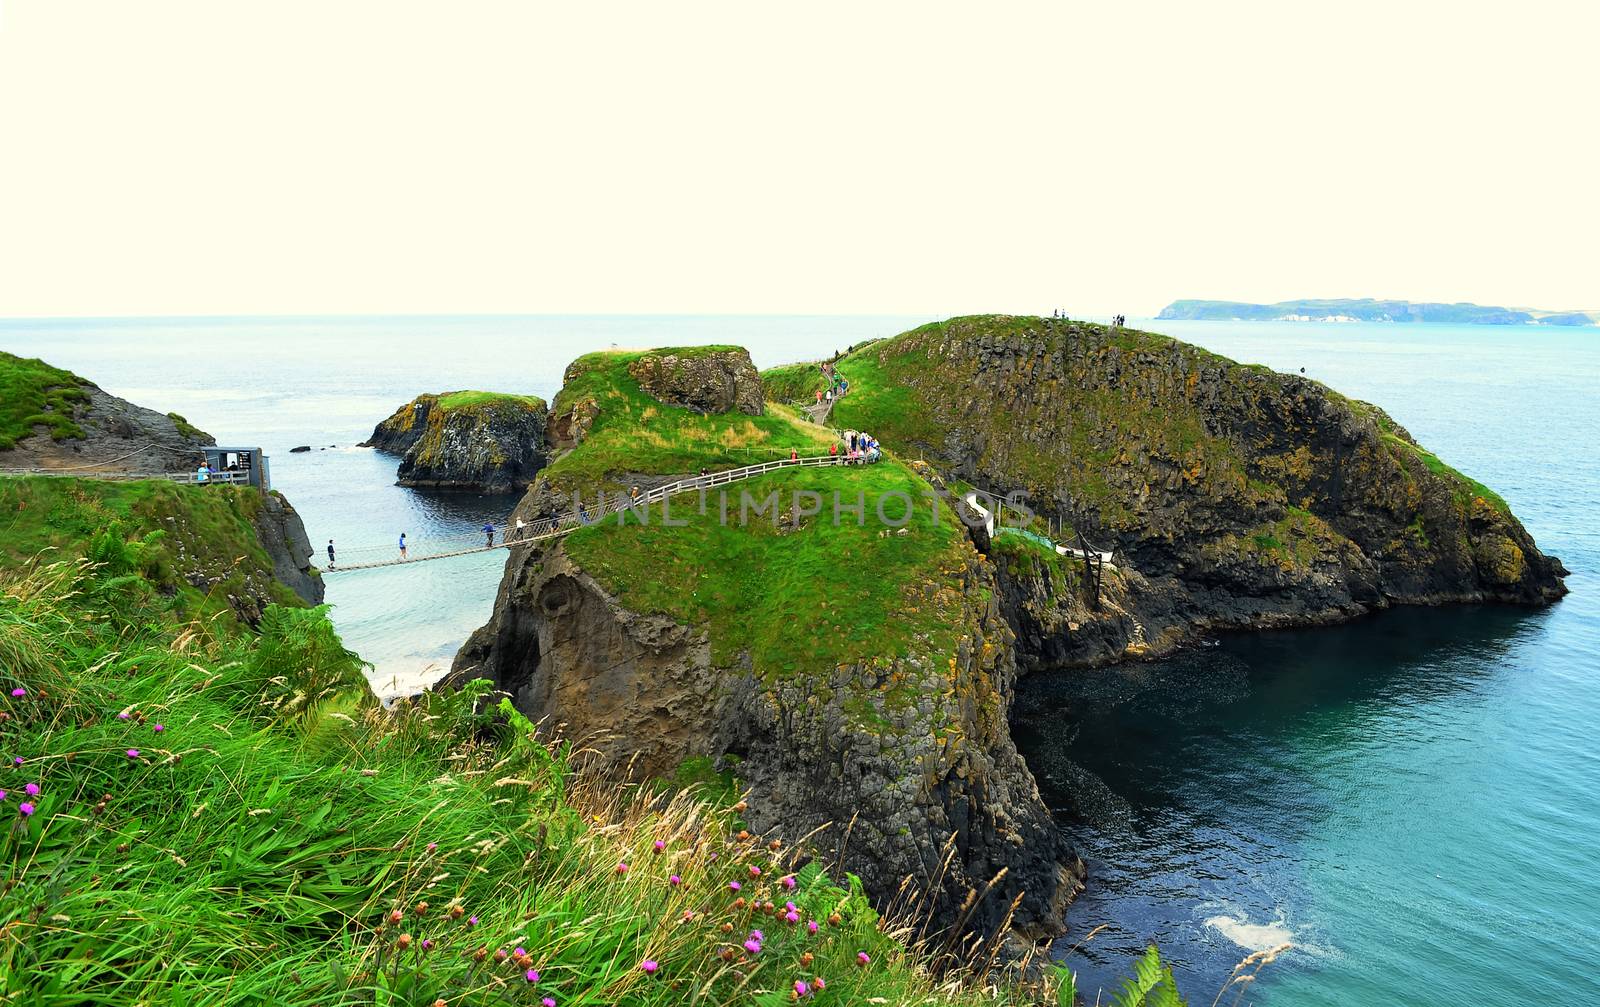 Carrick-a-Rede Rope Bridge is a famous rope bridge near Ballintoy in County Antrim, Northern Ireland.